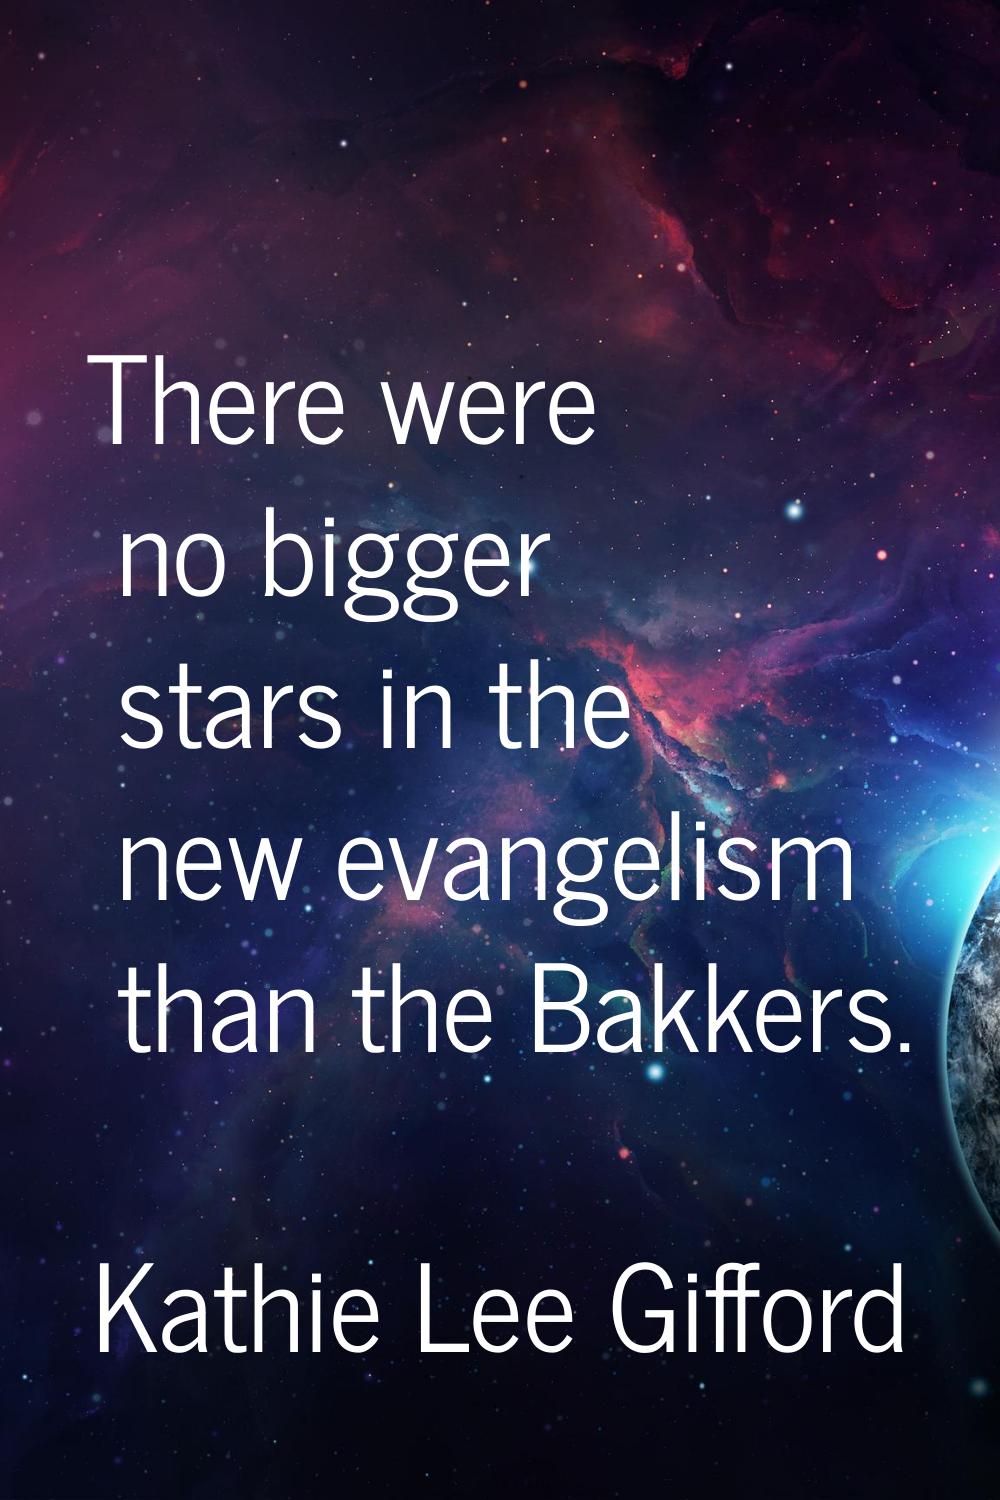 There were no bigger stars in the new evangelism than the Bakkers.